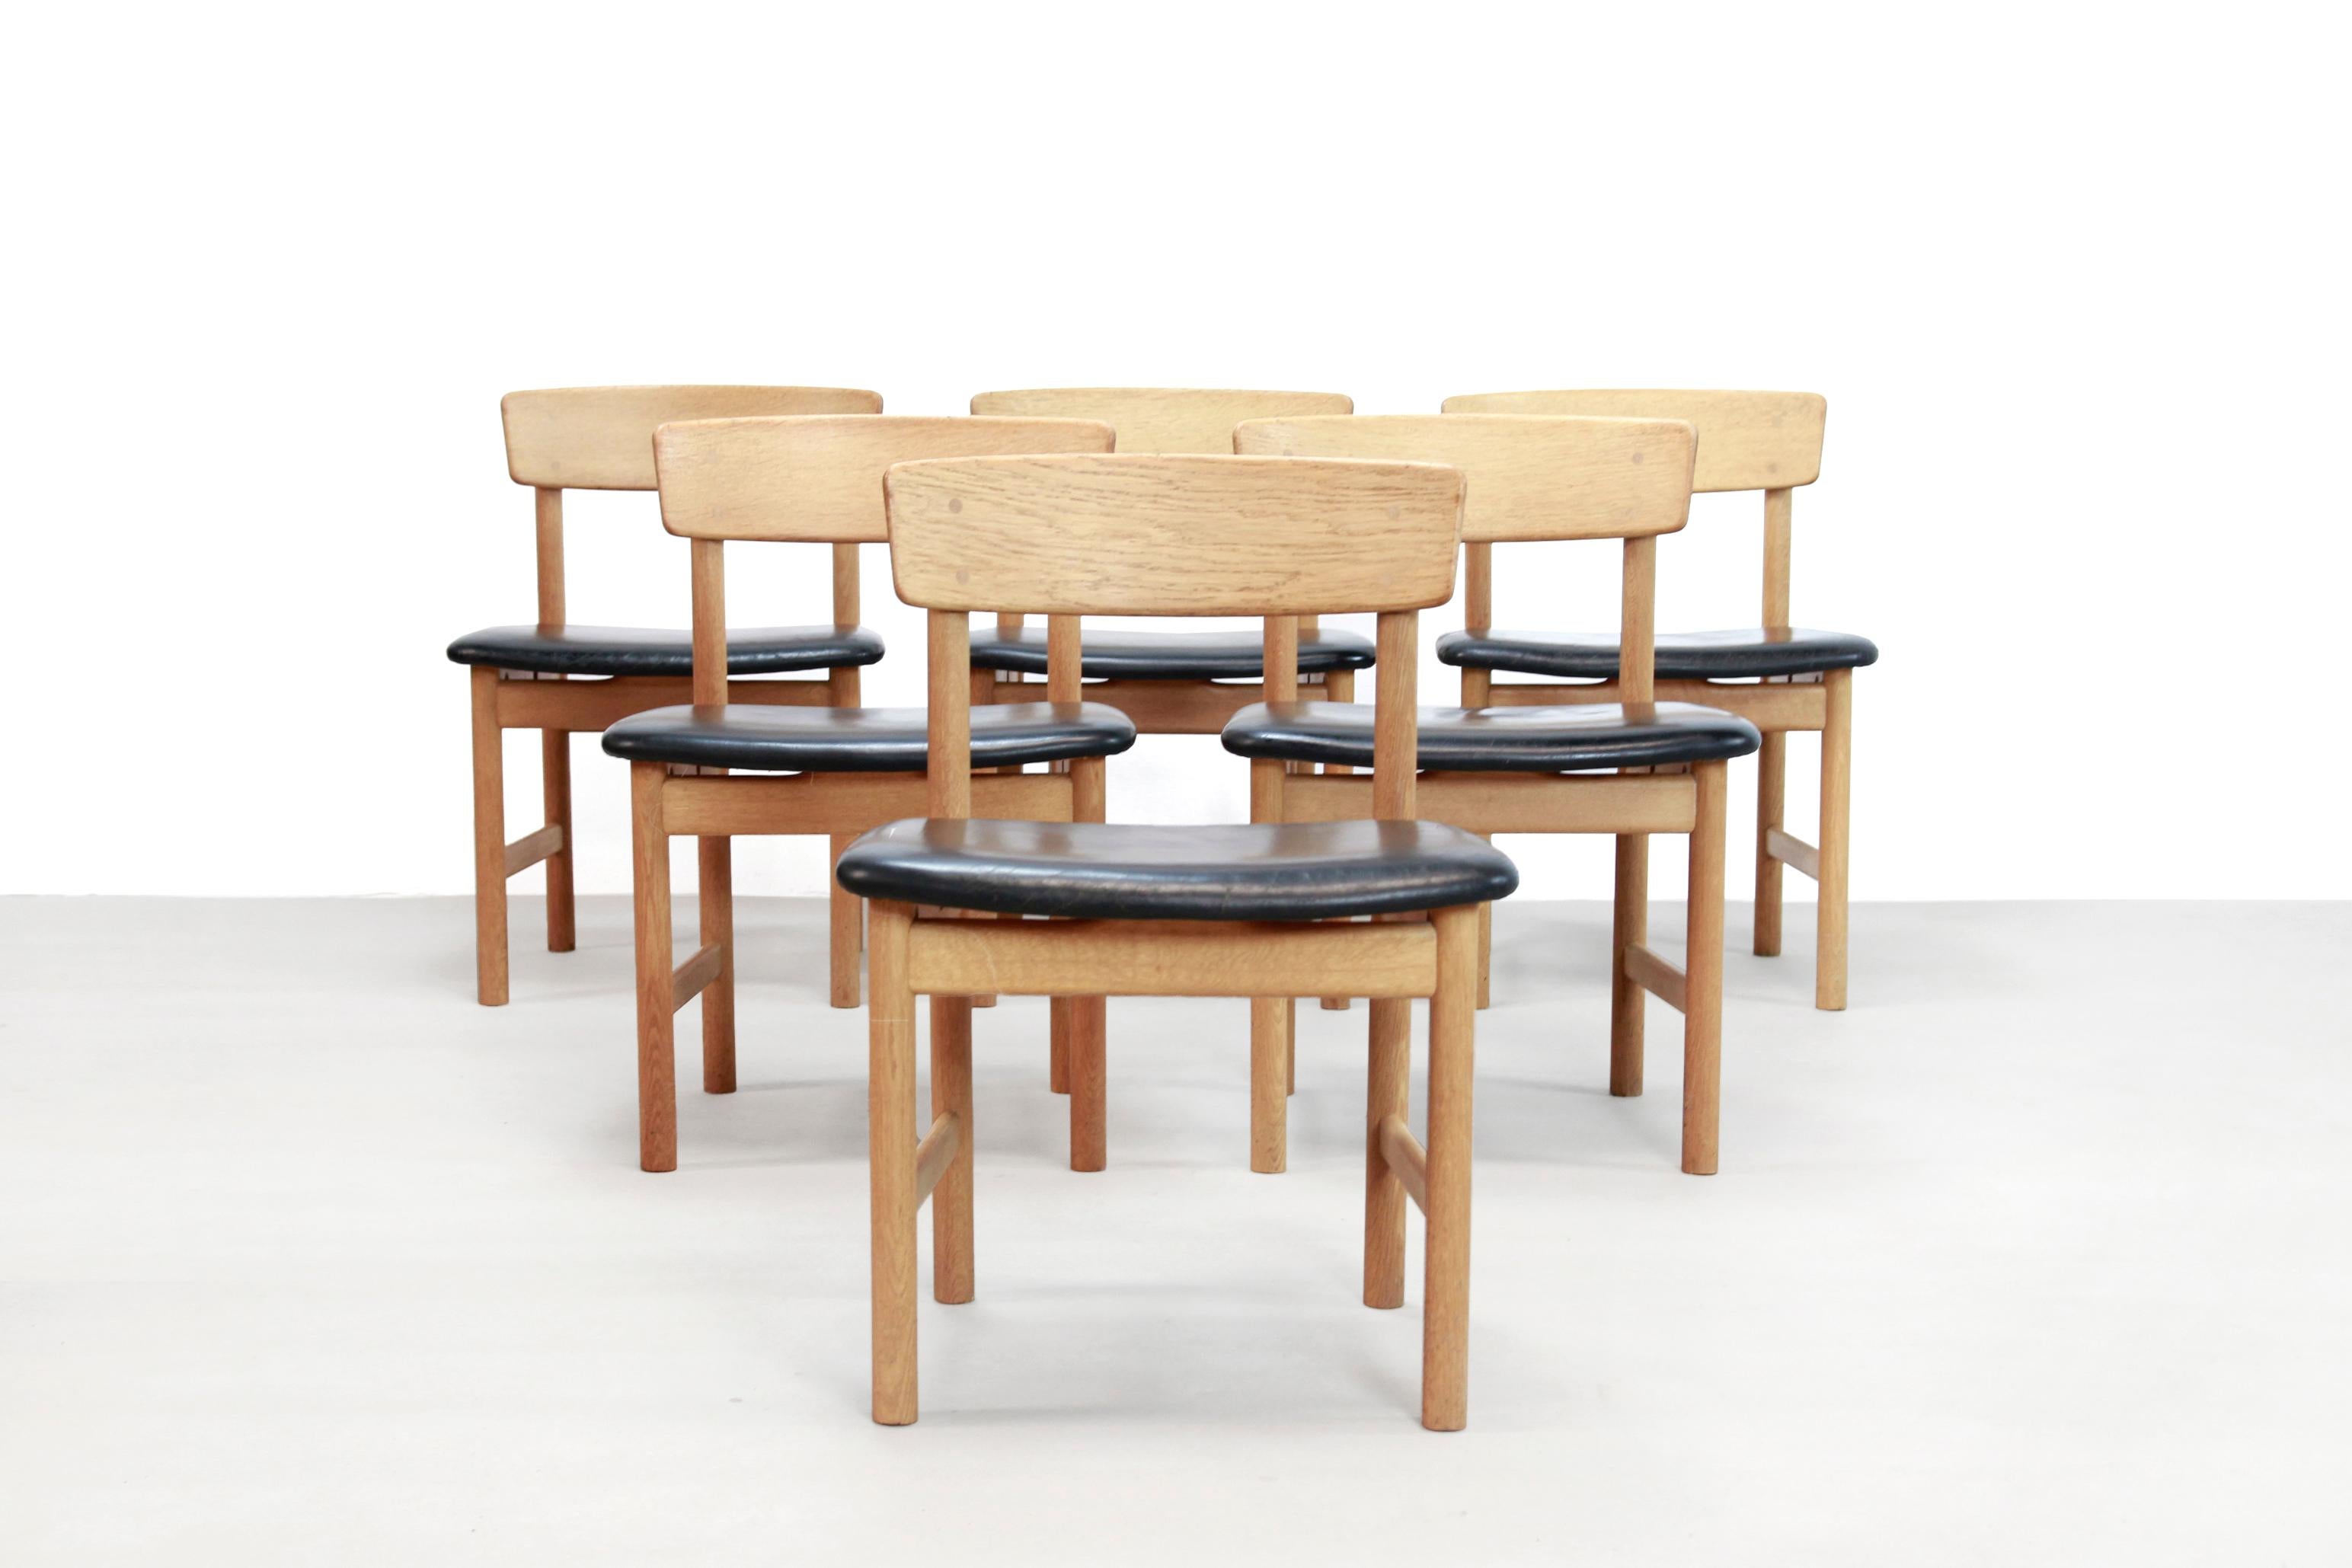 Beautiful oak Danish design dining room chairs upholstered with black leather, which is designed by Borge Mogensen and produced by Fredericia. These chairs have the beautiful natural and Minimalist Shaker design what we are used to from Mogensen.